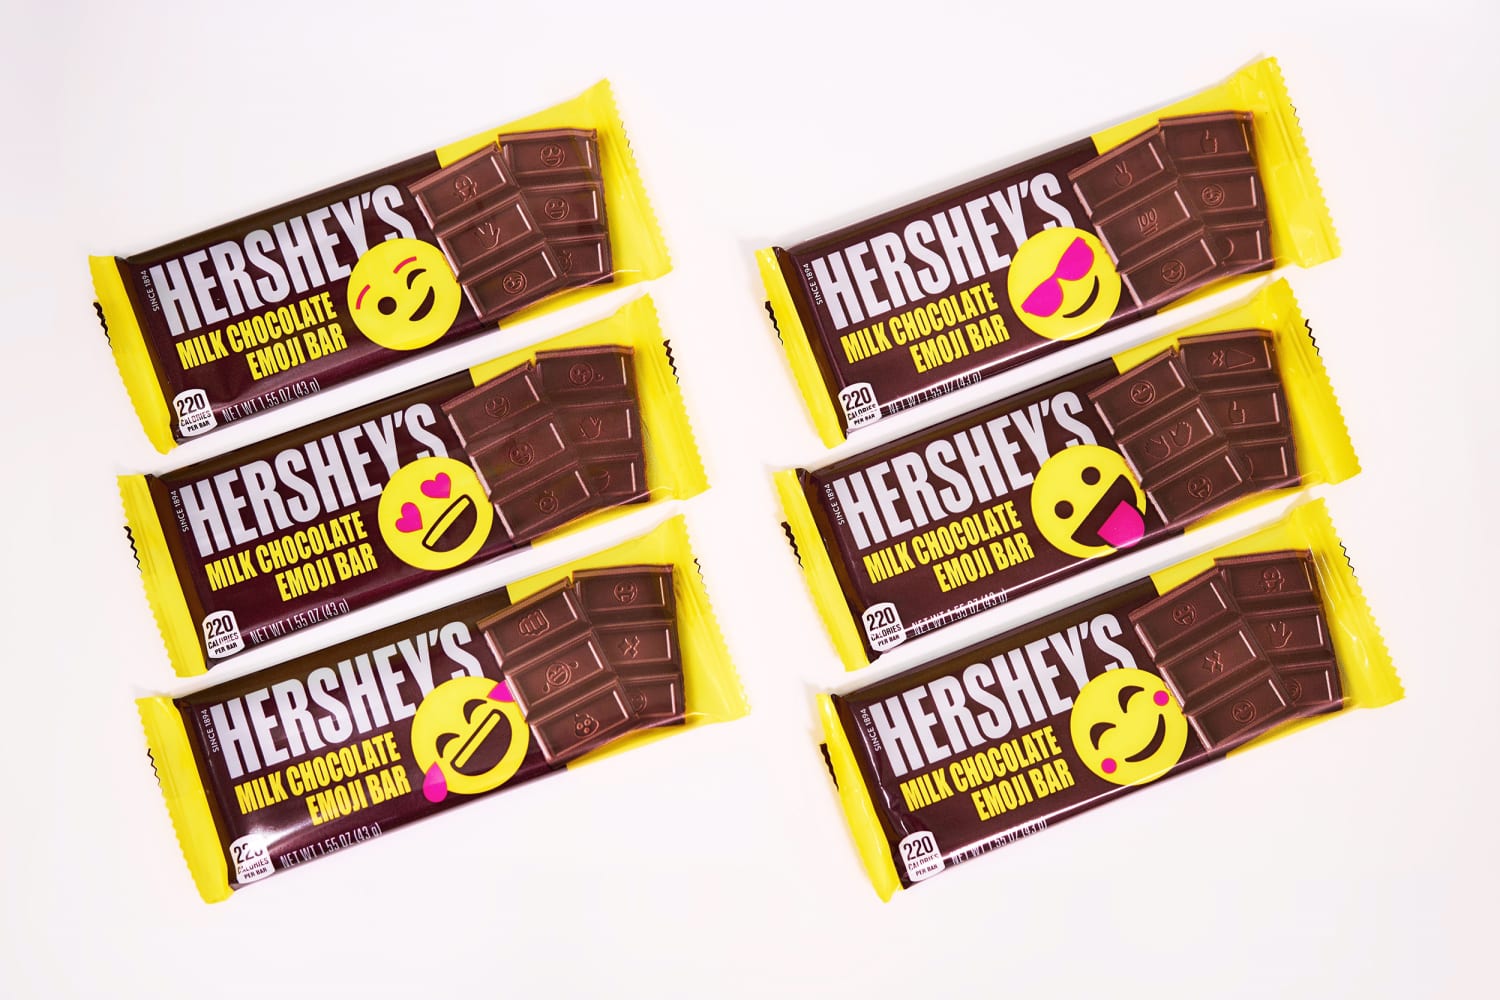 Hershey's chocolate bars be with emojis — yes, even the one